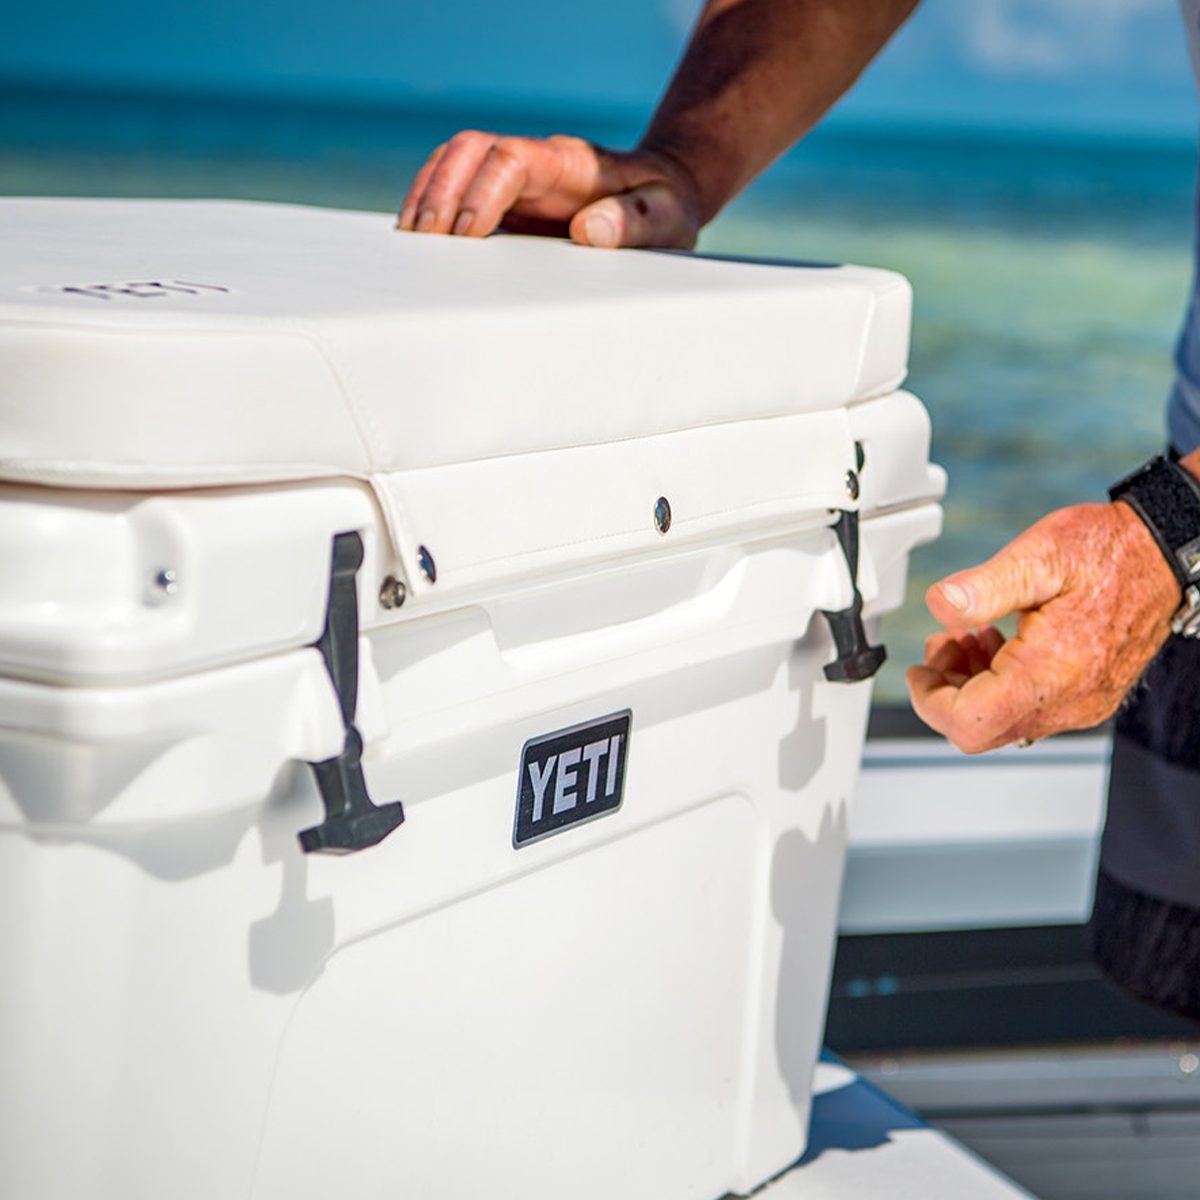 https://www.familyhandyman.com/wp-content/uploads/2023/08/Chill-Out-With-the-14-Best-Yeti-Cooler-Accessories_FT_via-amazon.com_.jpg